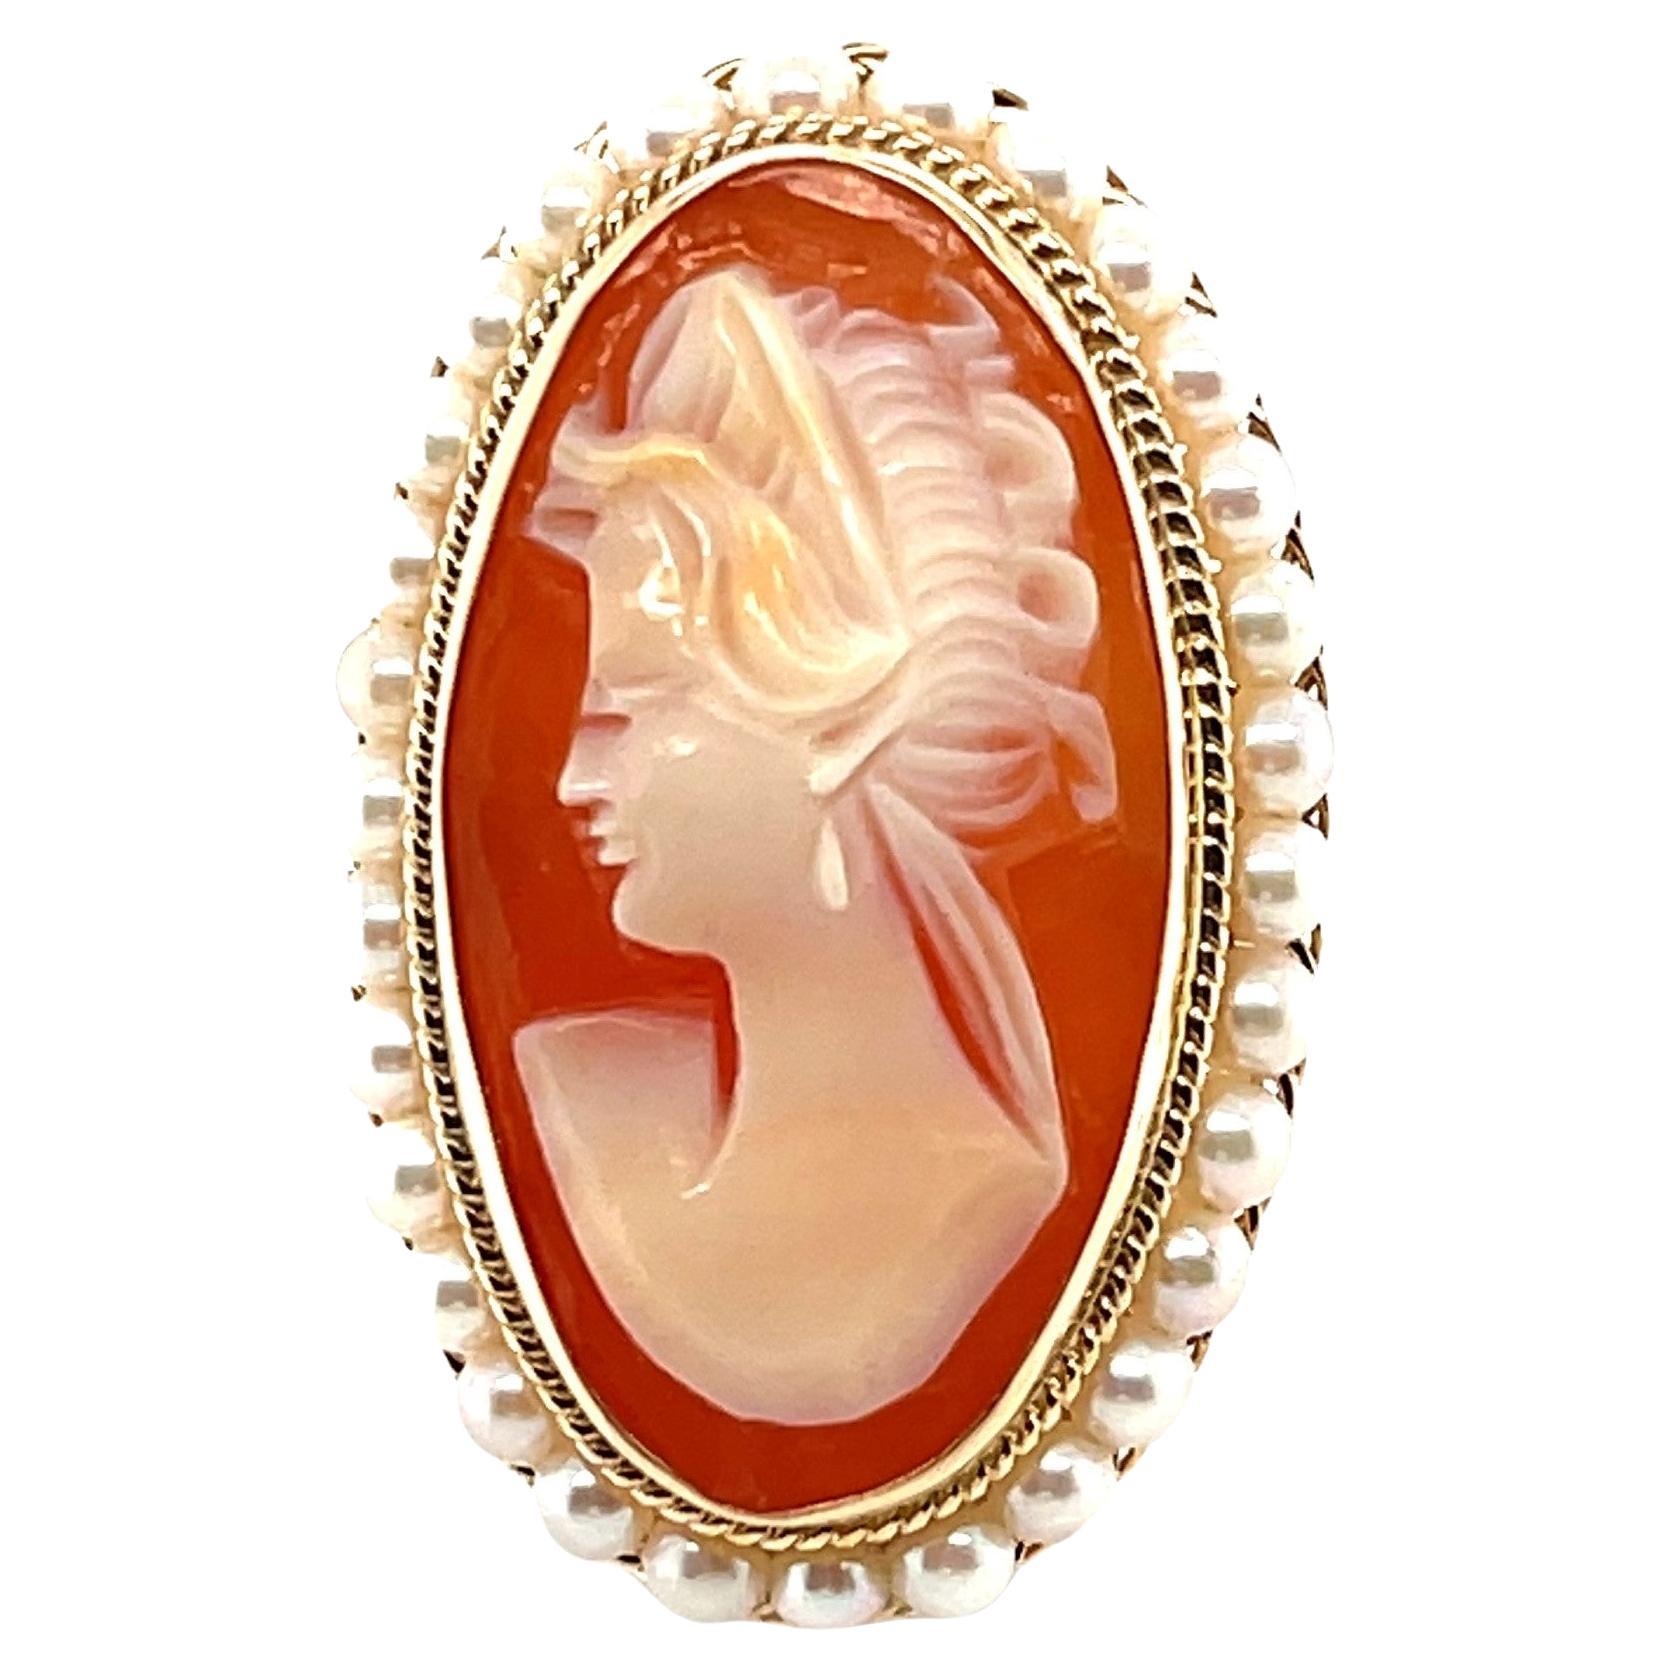 This lovely cocktail ring features a large, elongated shell cameo that was beautifully hand carved in Italy. The cameo is bezel set and encircled with 3mm seed pearls that have been hand-strung on fine gold wire. The pearls sit atop an intricate